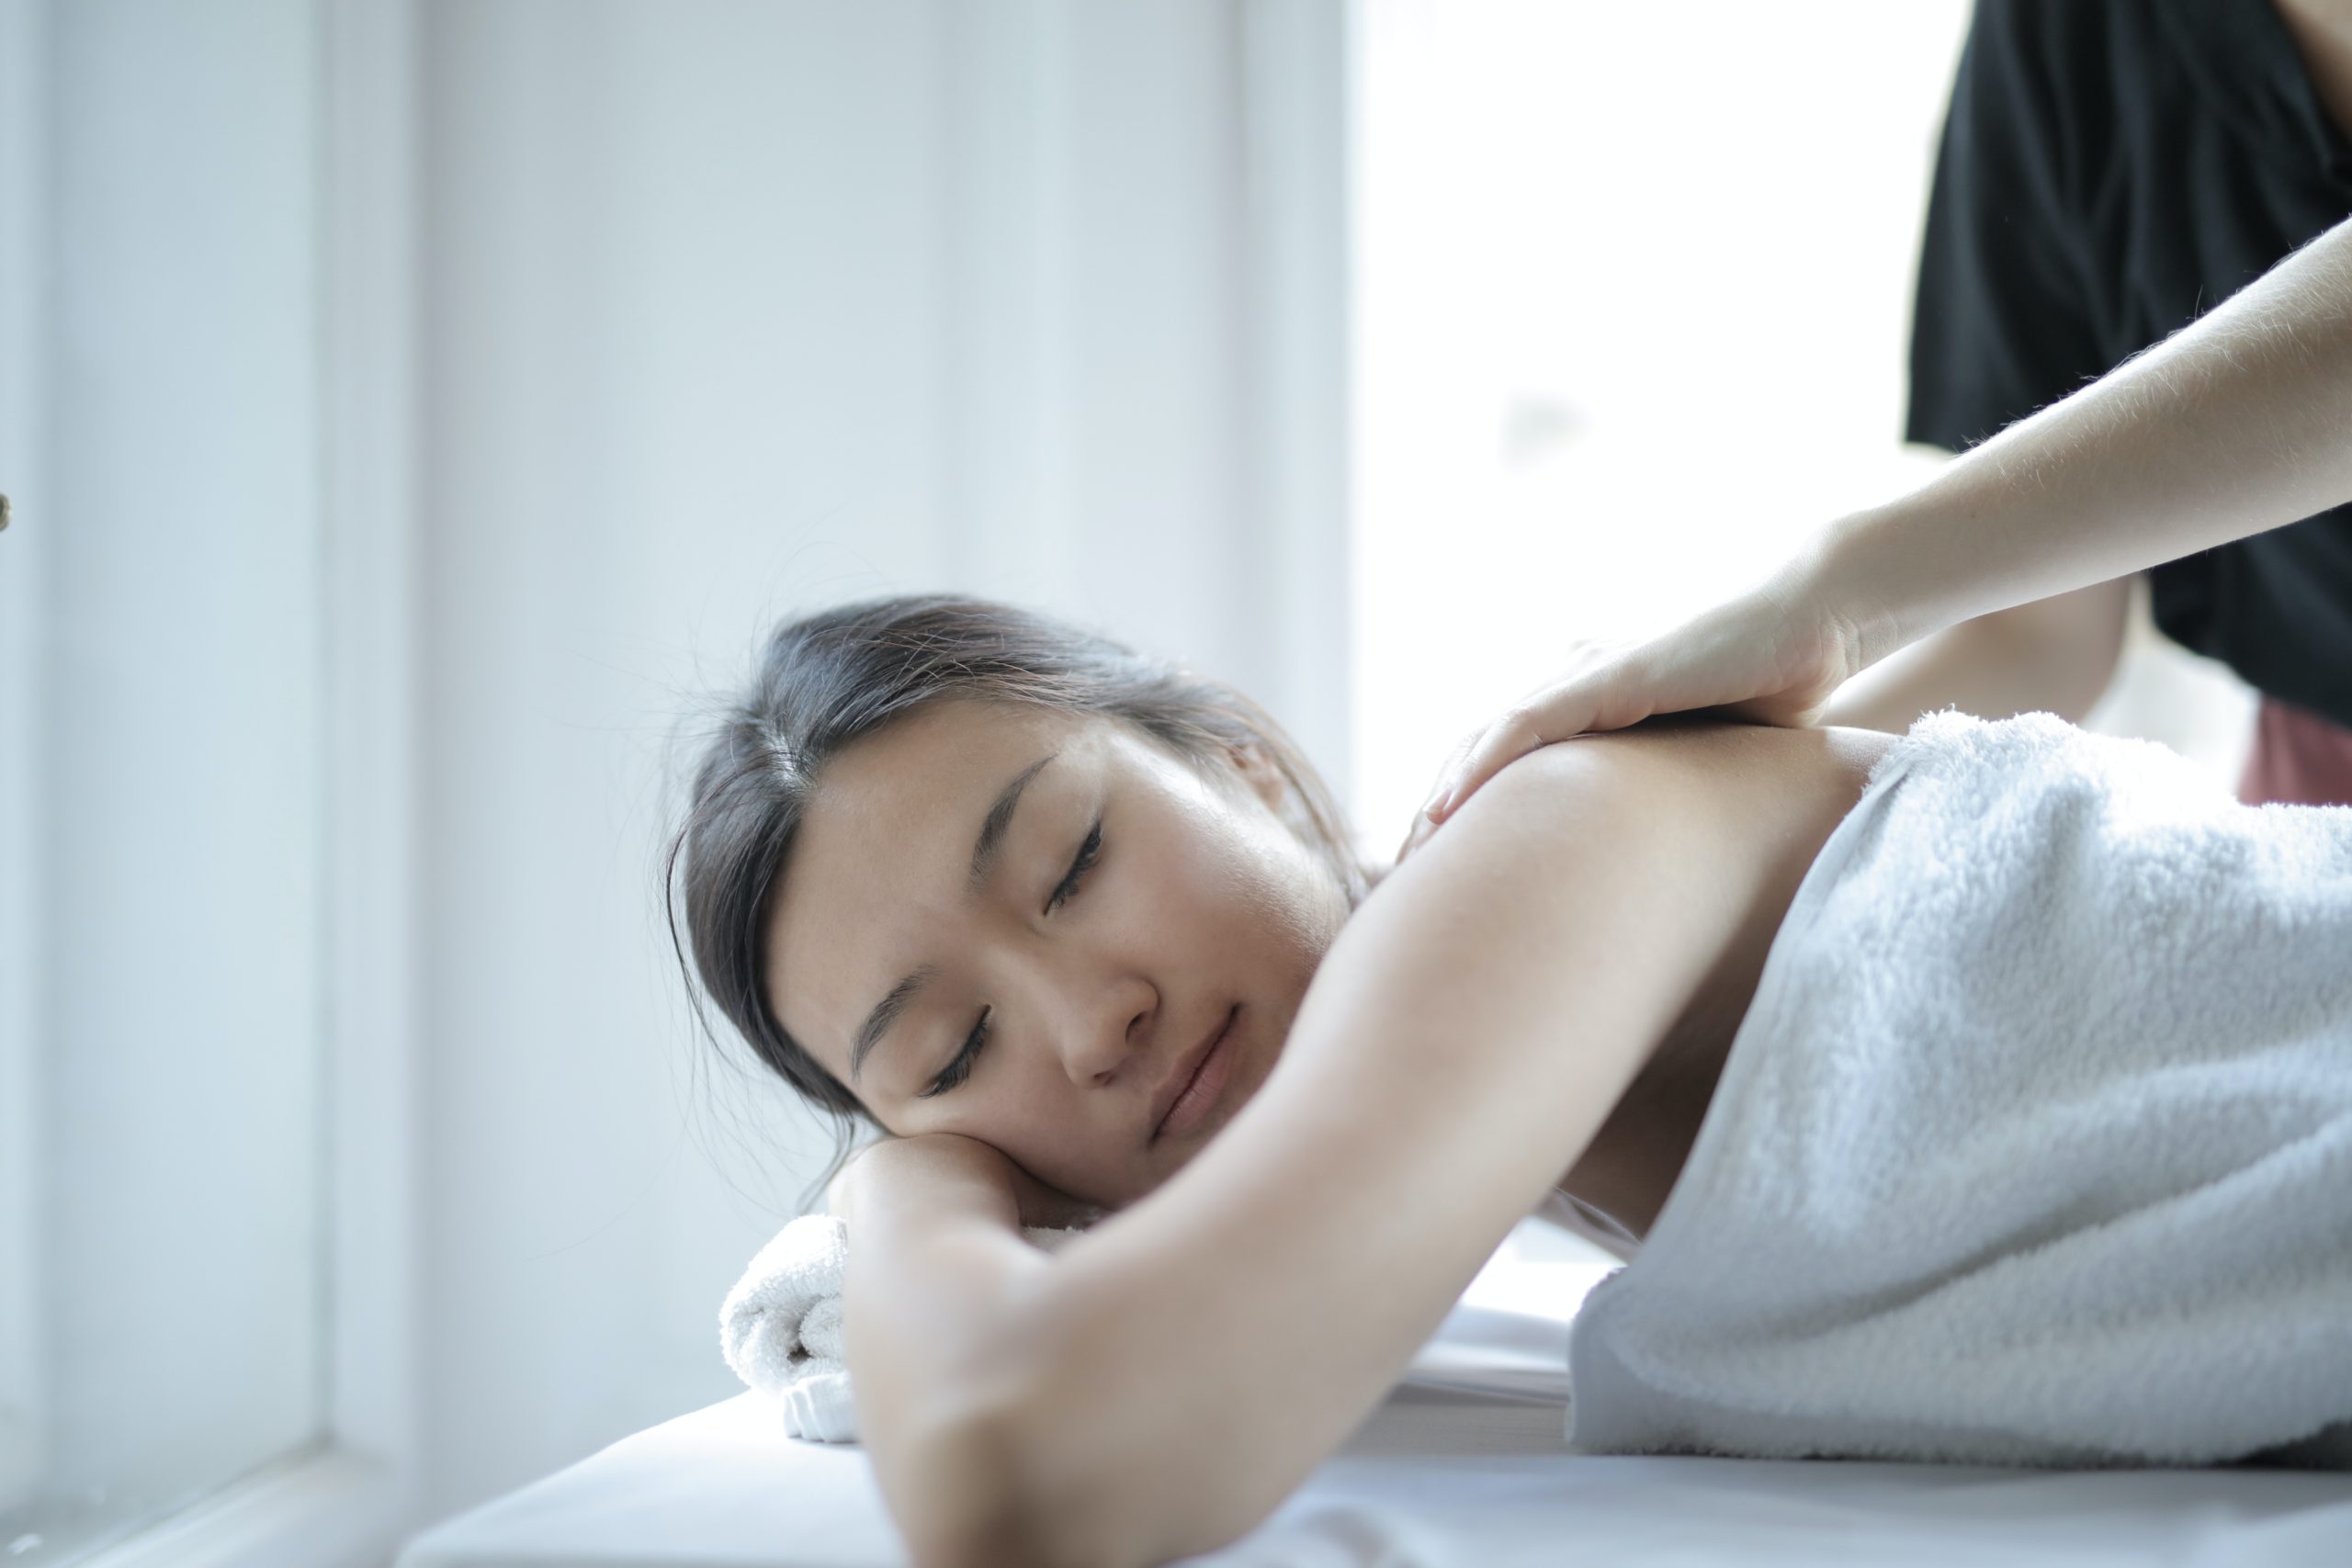 Four Types of Massage and Their Benefits